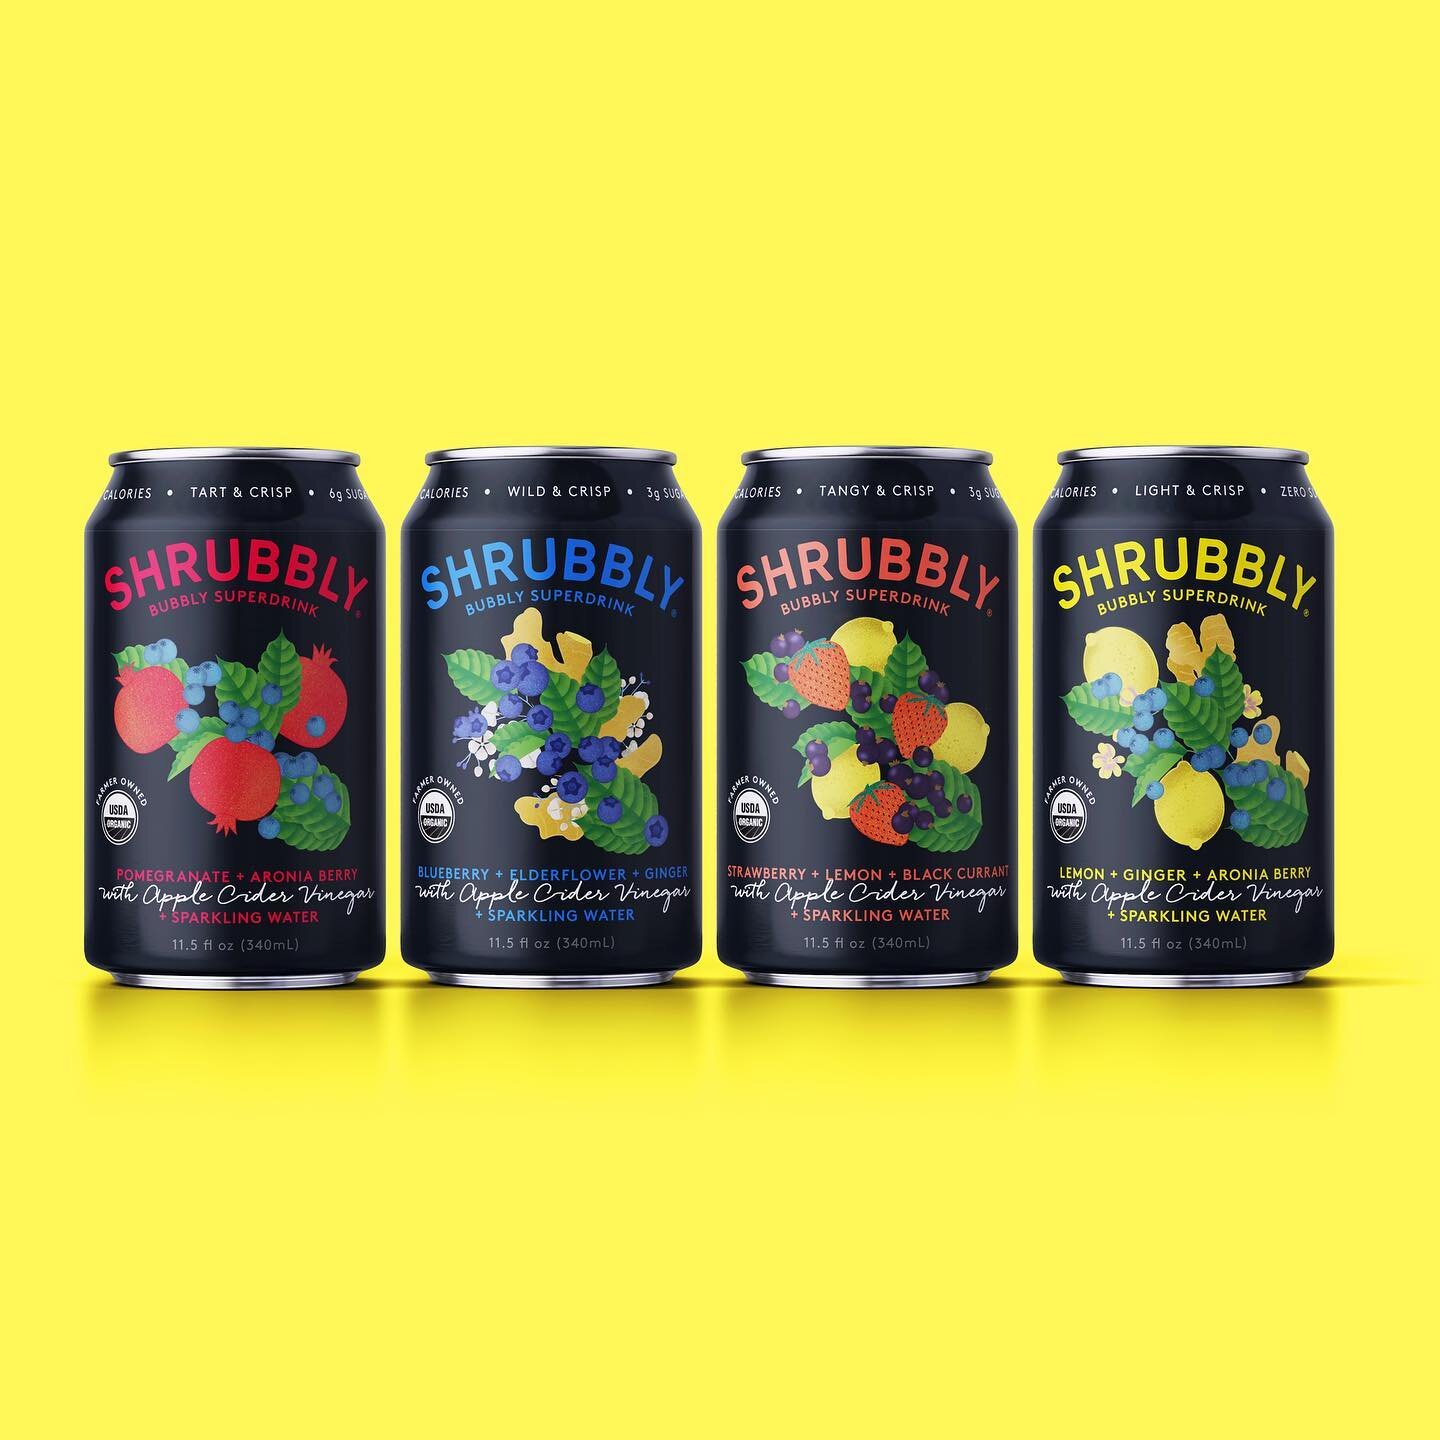 Our brand and packaging redesign for @shrubbly celebrates the wild shrubs, berries and citrus fruits that make this unique, bubbly superdrink so delicious with rich illustrations that pop on an intense black background. 

_
#shrubbly #shrubblyvermont